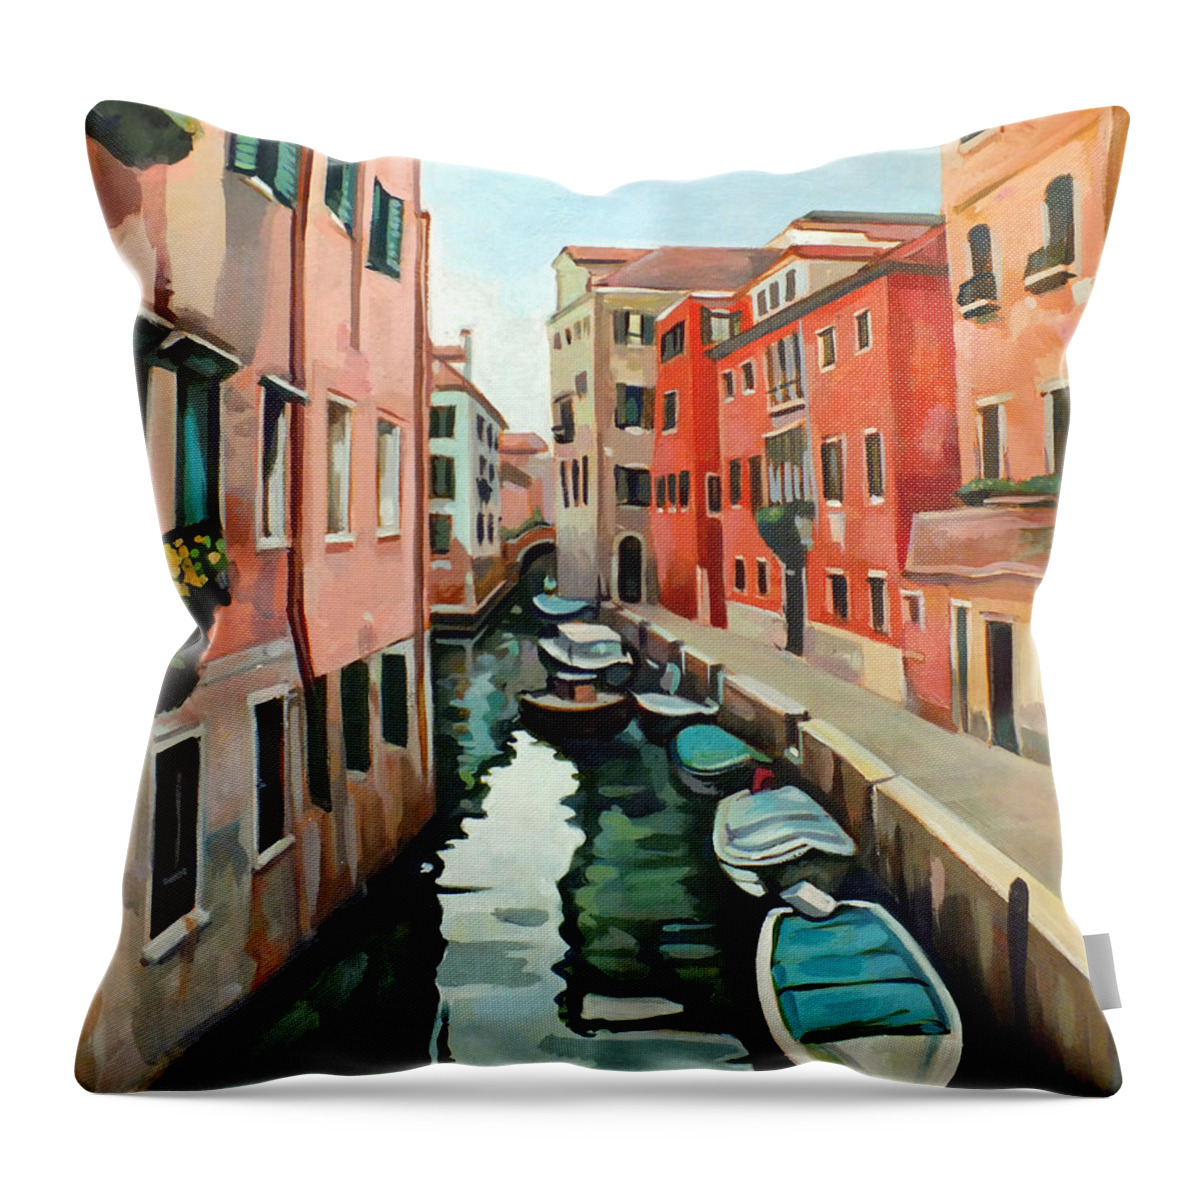 River Boats Throw Pillow featuring the painting Venetian Cityscape by Filip Mihail